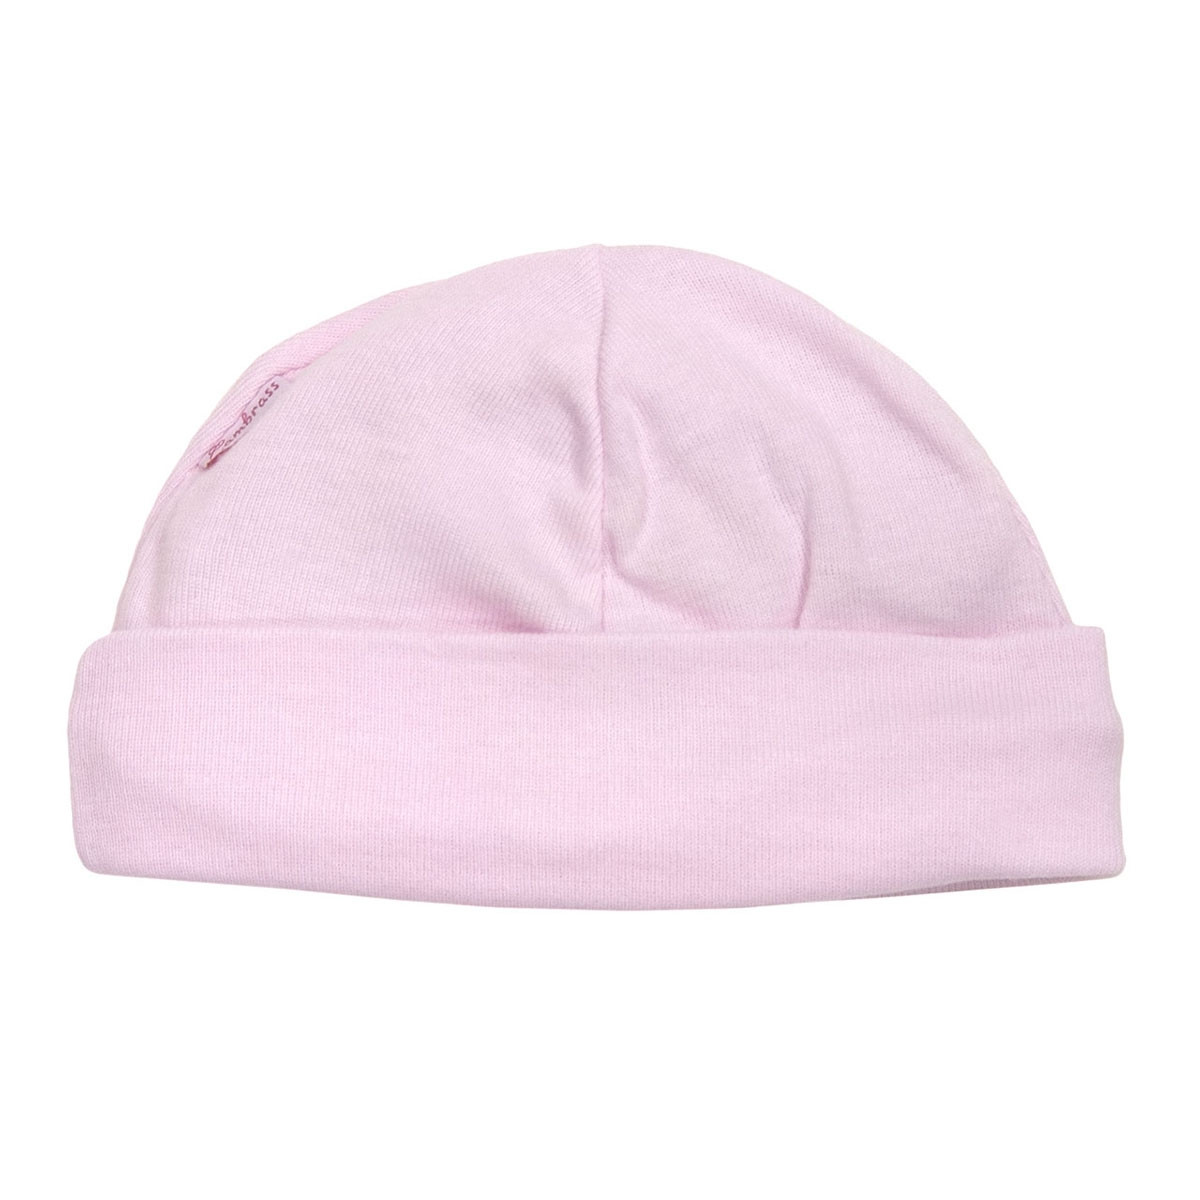 TRICOT CAP LISO PINK CAMBRASS - 1